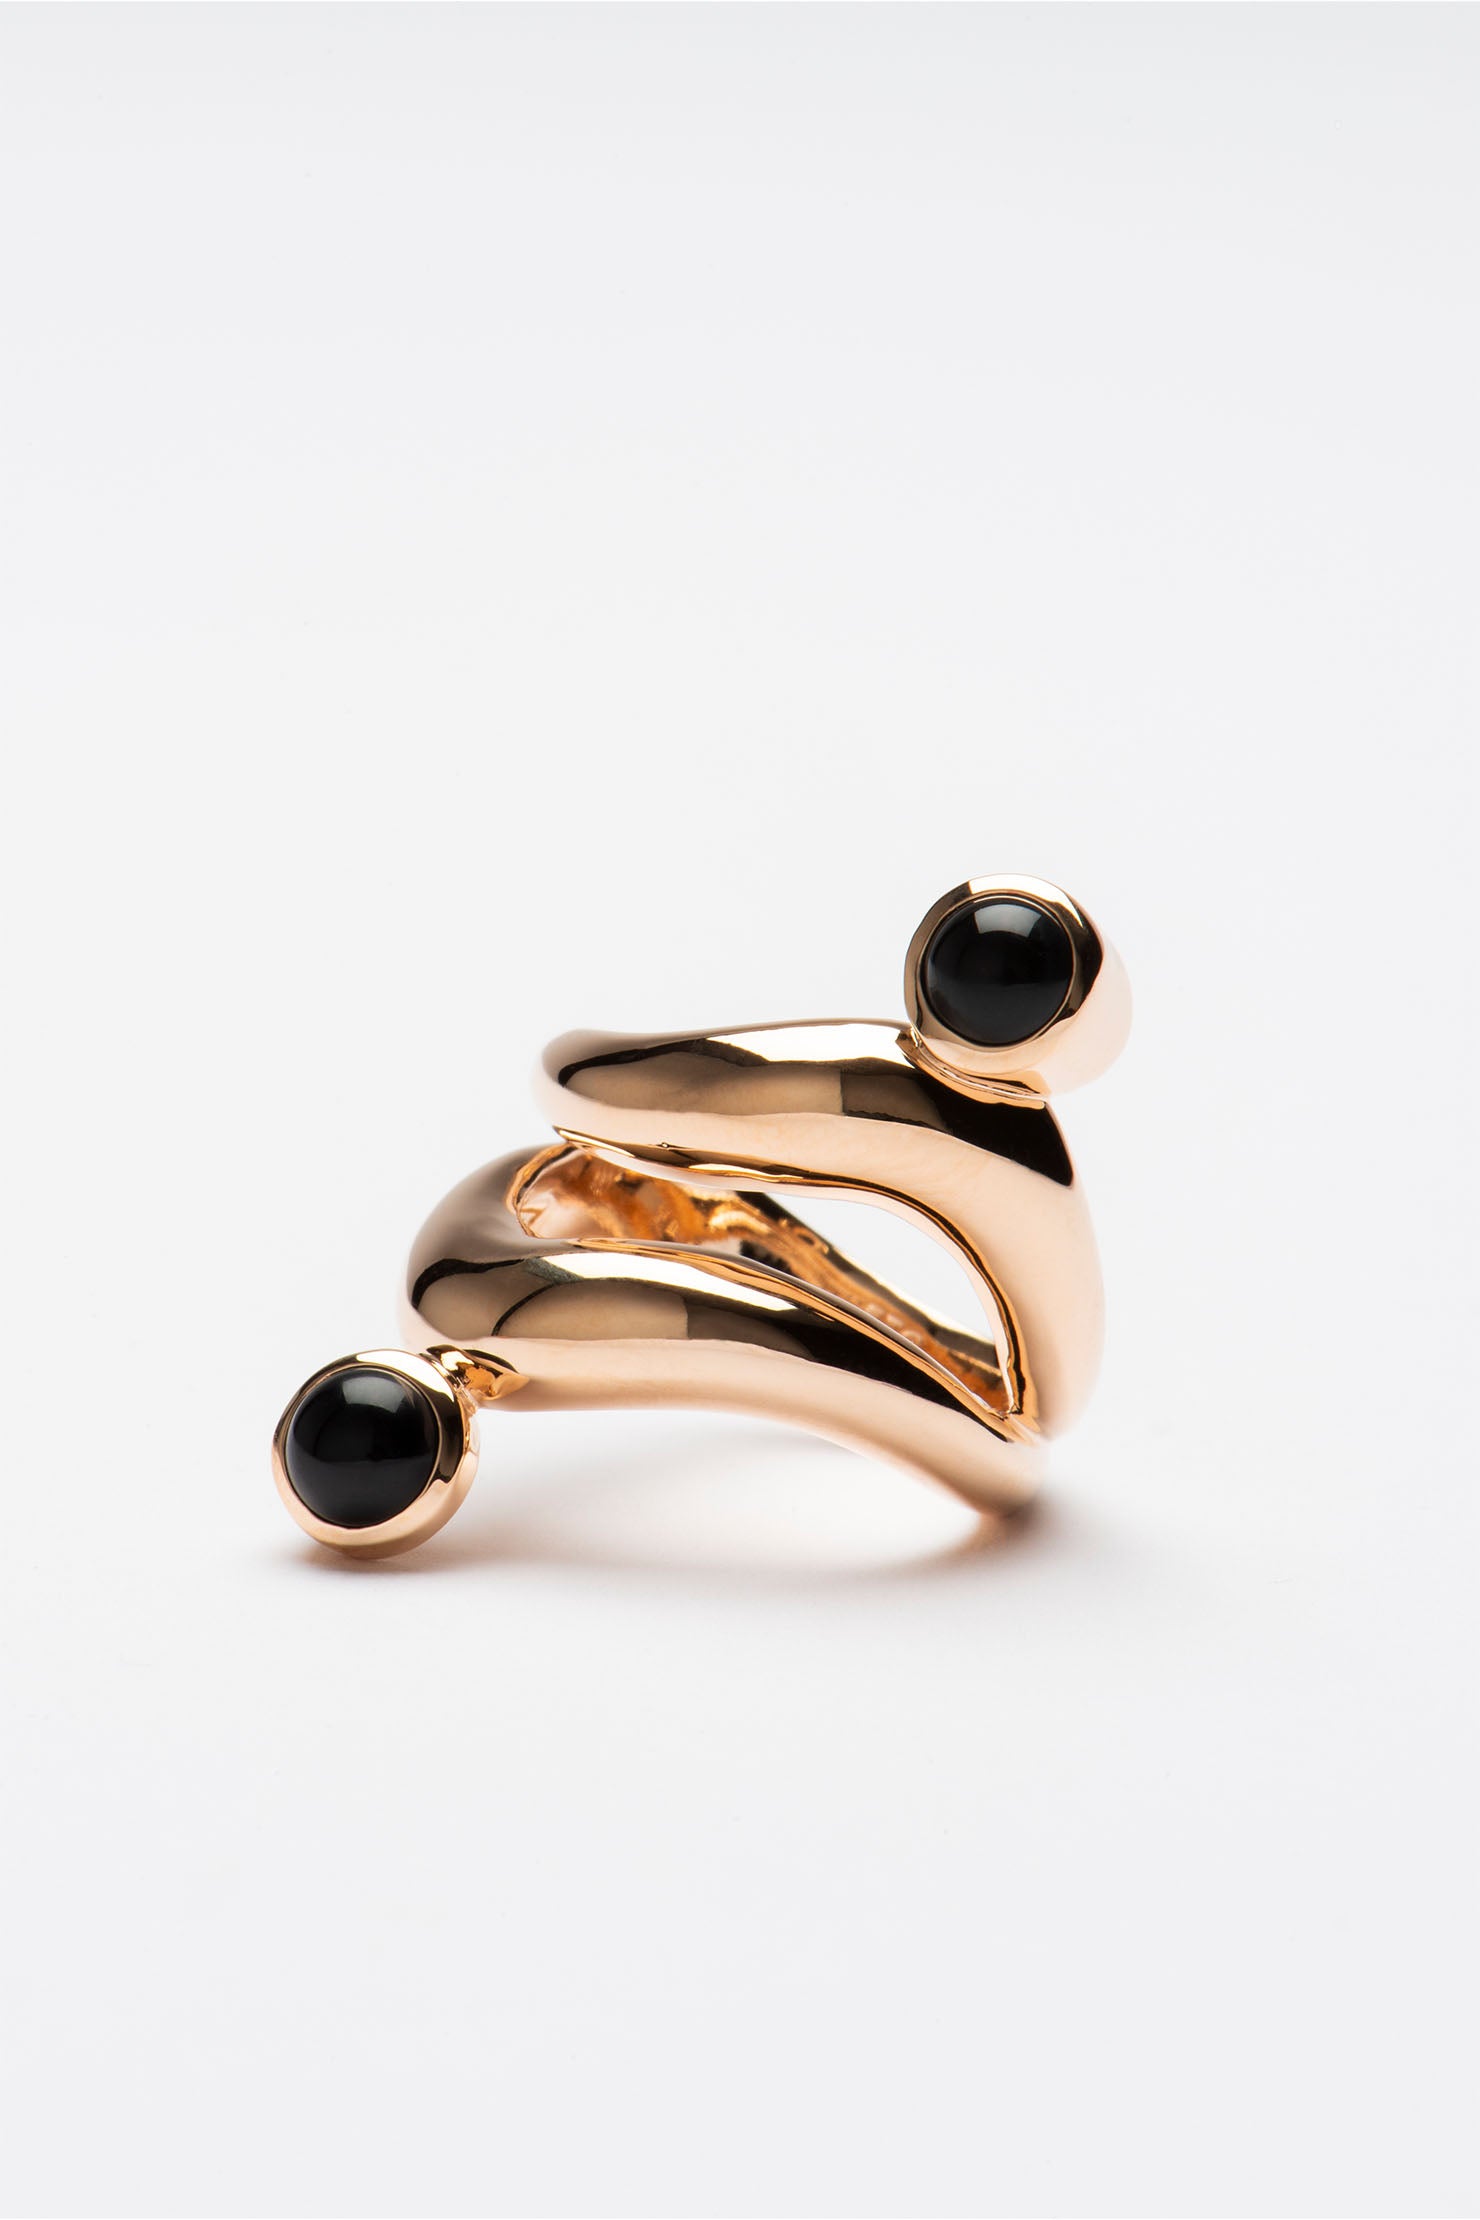 I Need Space - Gold Ring - Paparazzi Accessories